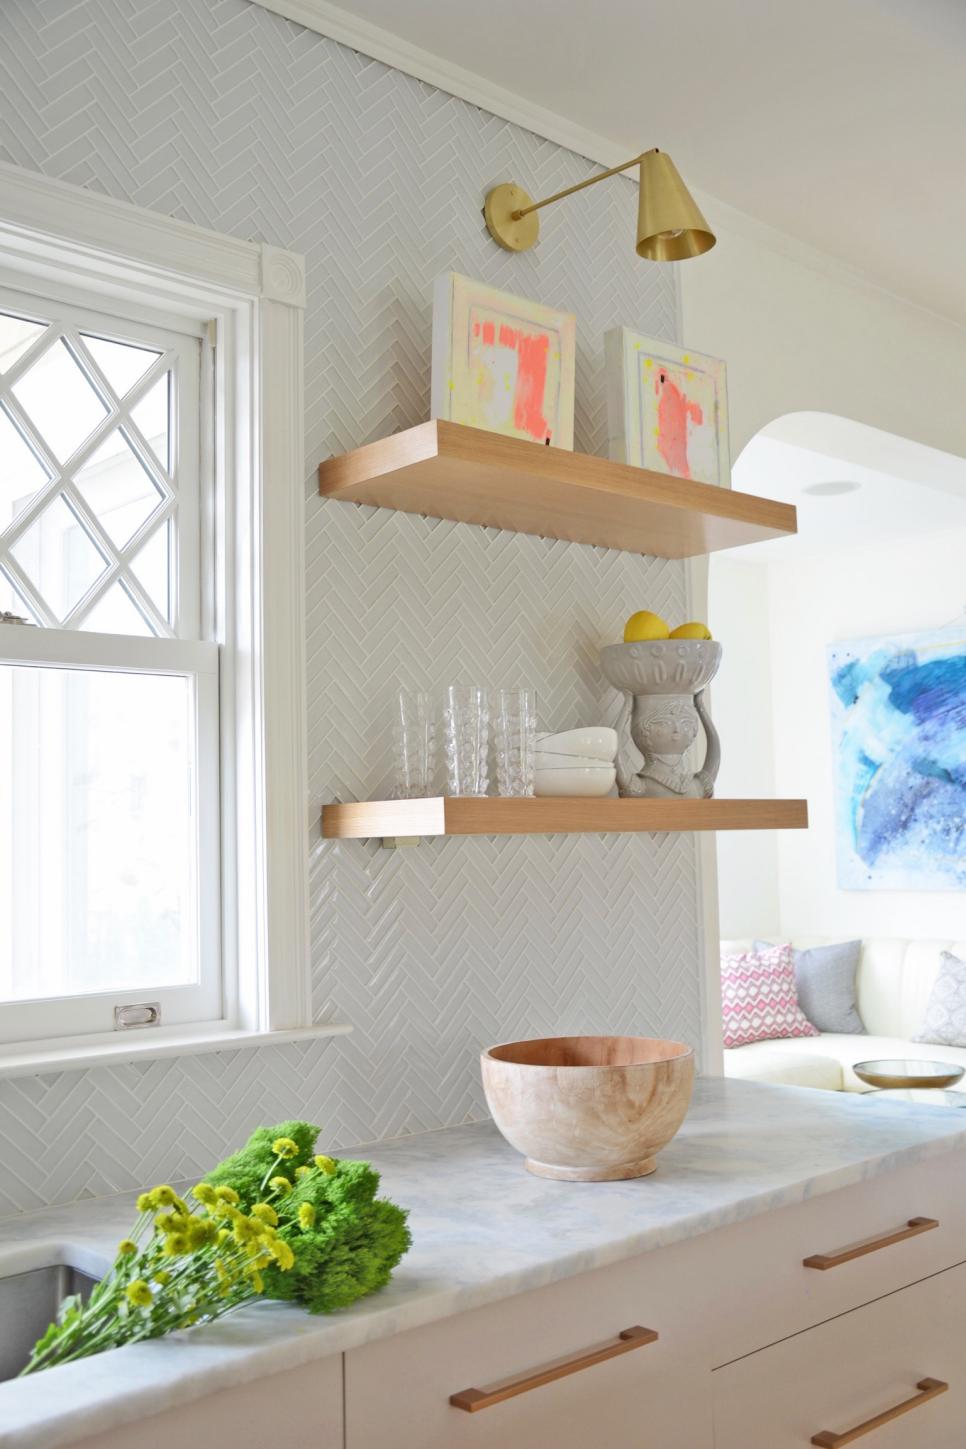 Modern White Kitchen Detail With Gold Wall Sconce And Floating Shelves With White Glass Tile Hgtv